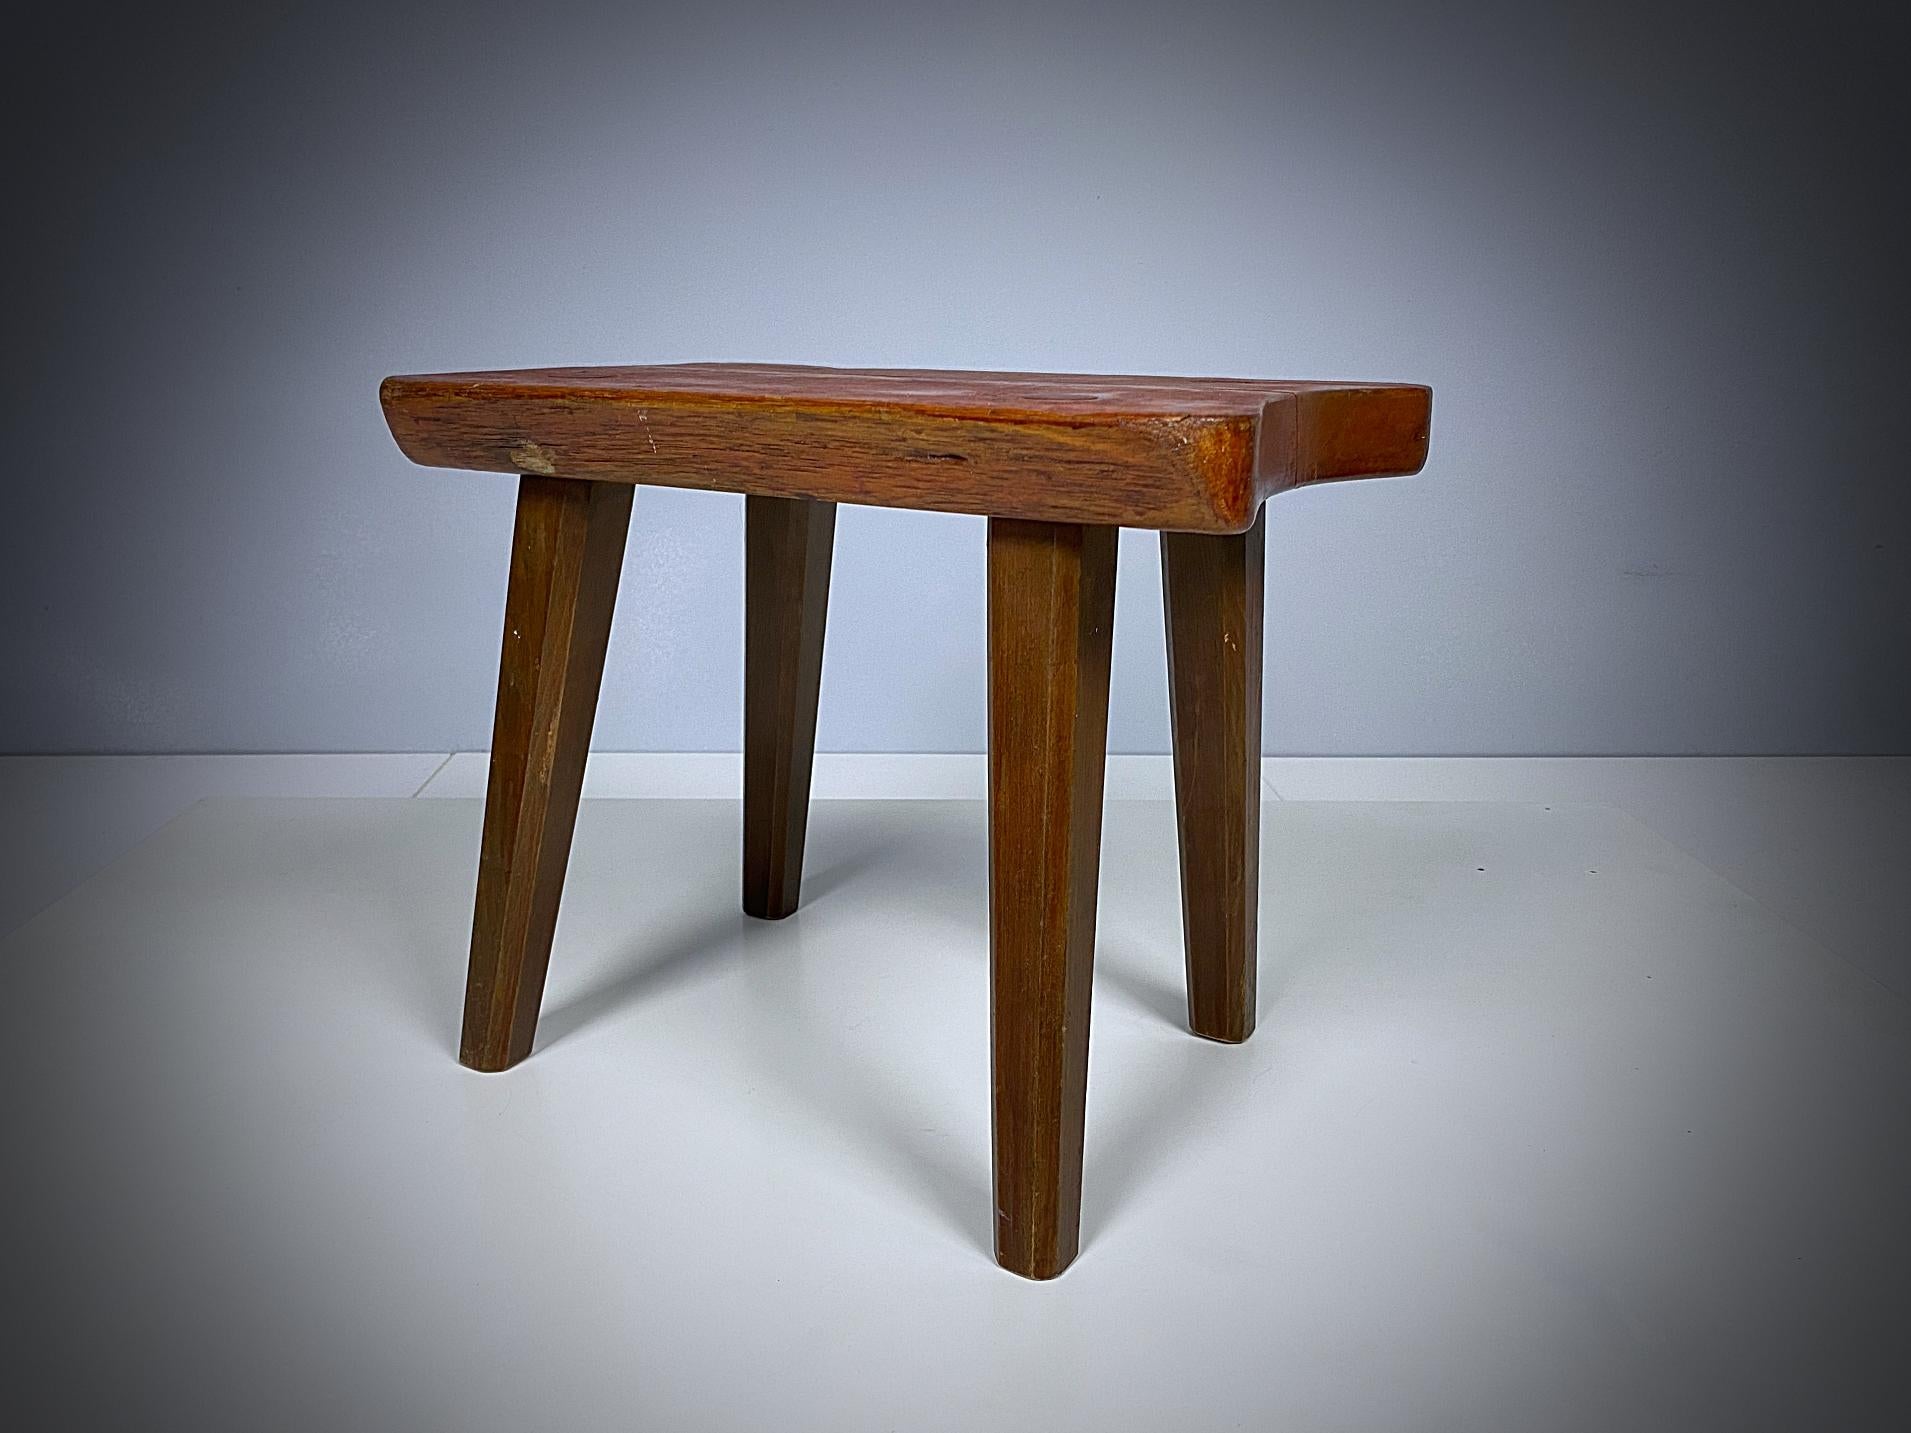 A beautifully French oak stool handmade in 1950s. The stool have nice crafted details such as the organic shaped seating. The solid oak shows an incredible patina in good original condition.
We found this unique object at an antique fair in